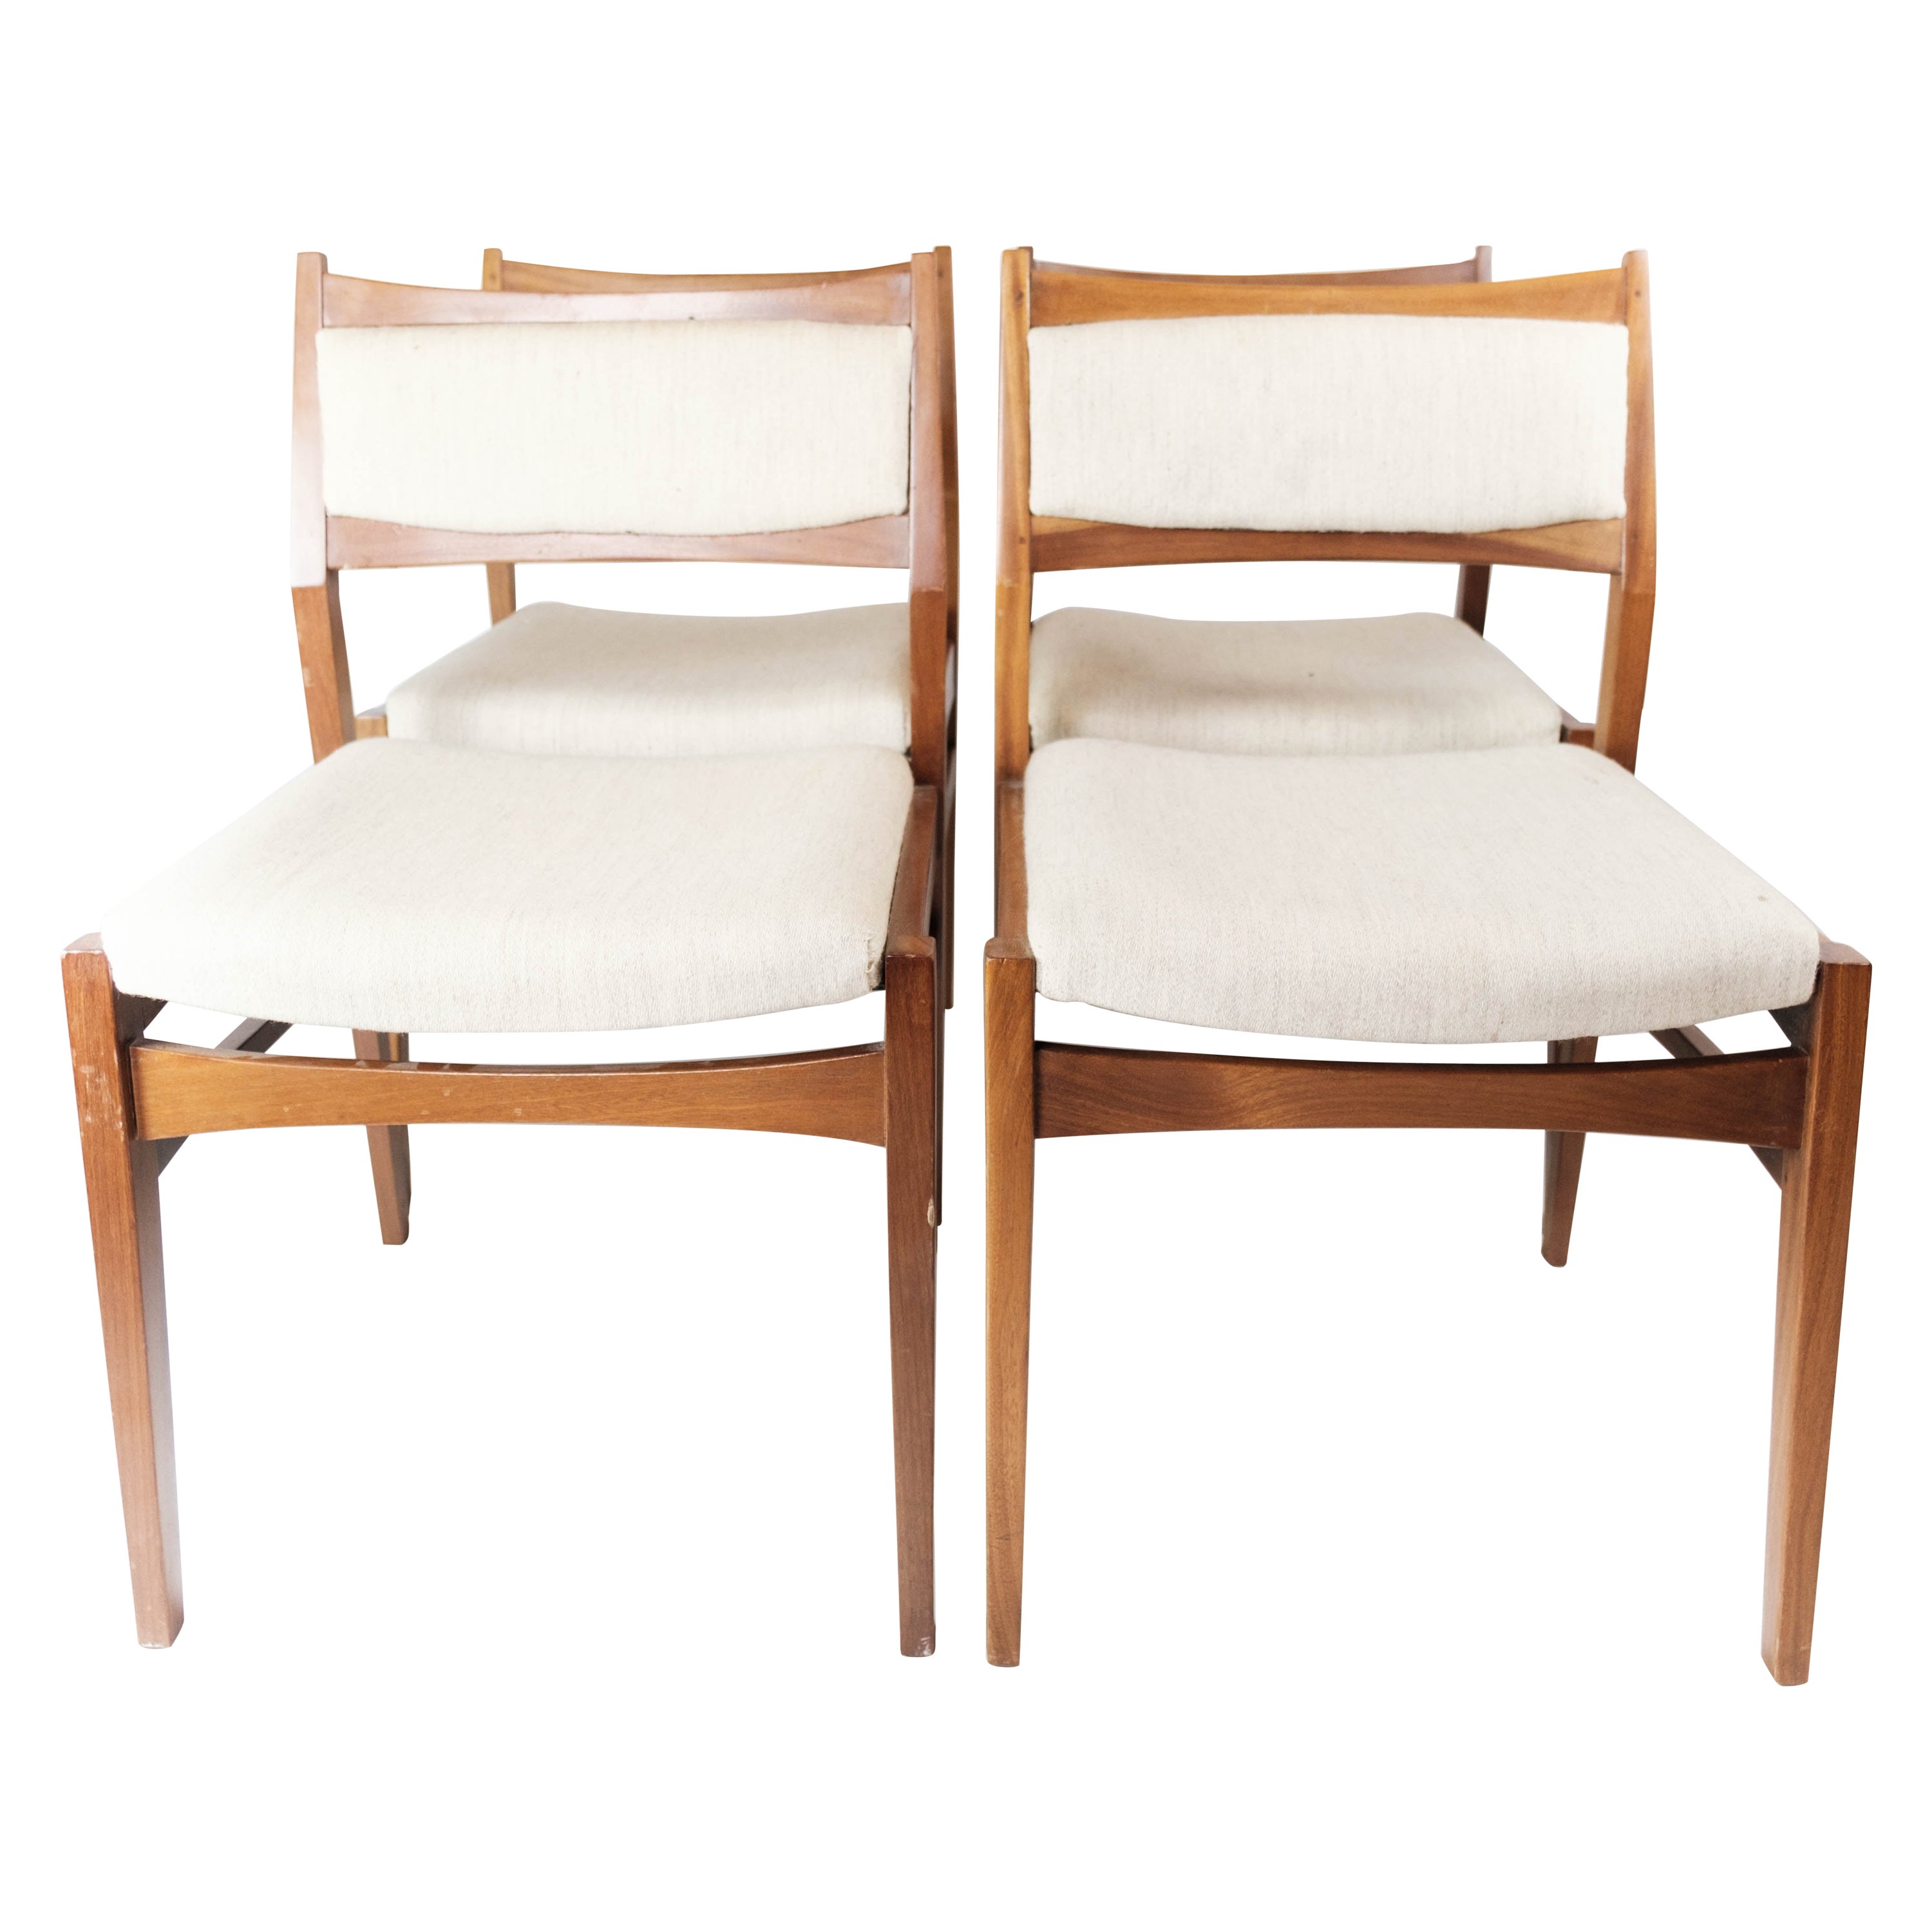 Set of Four Dining Room Chairs in Teak of Danish Design, 1960s